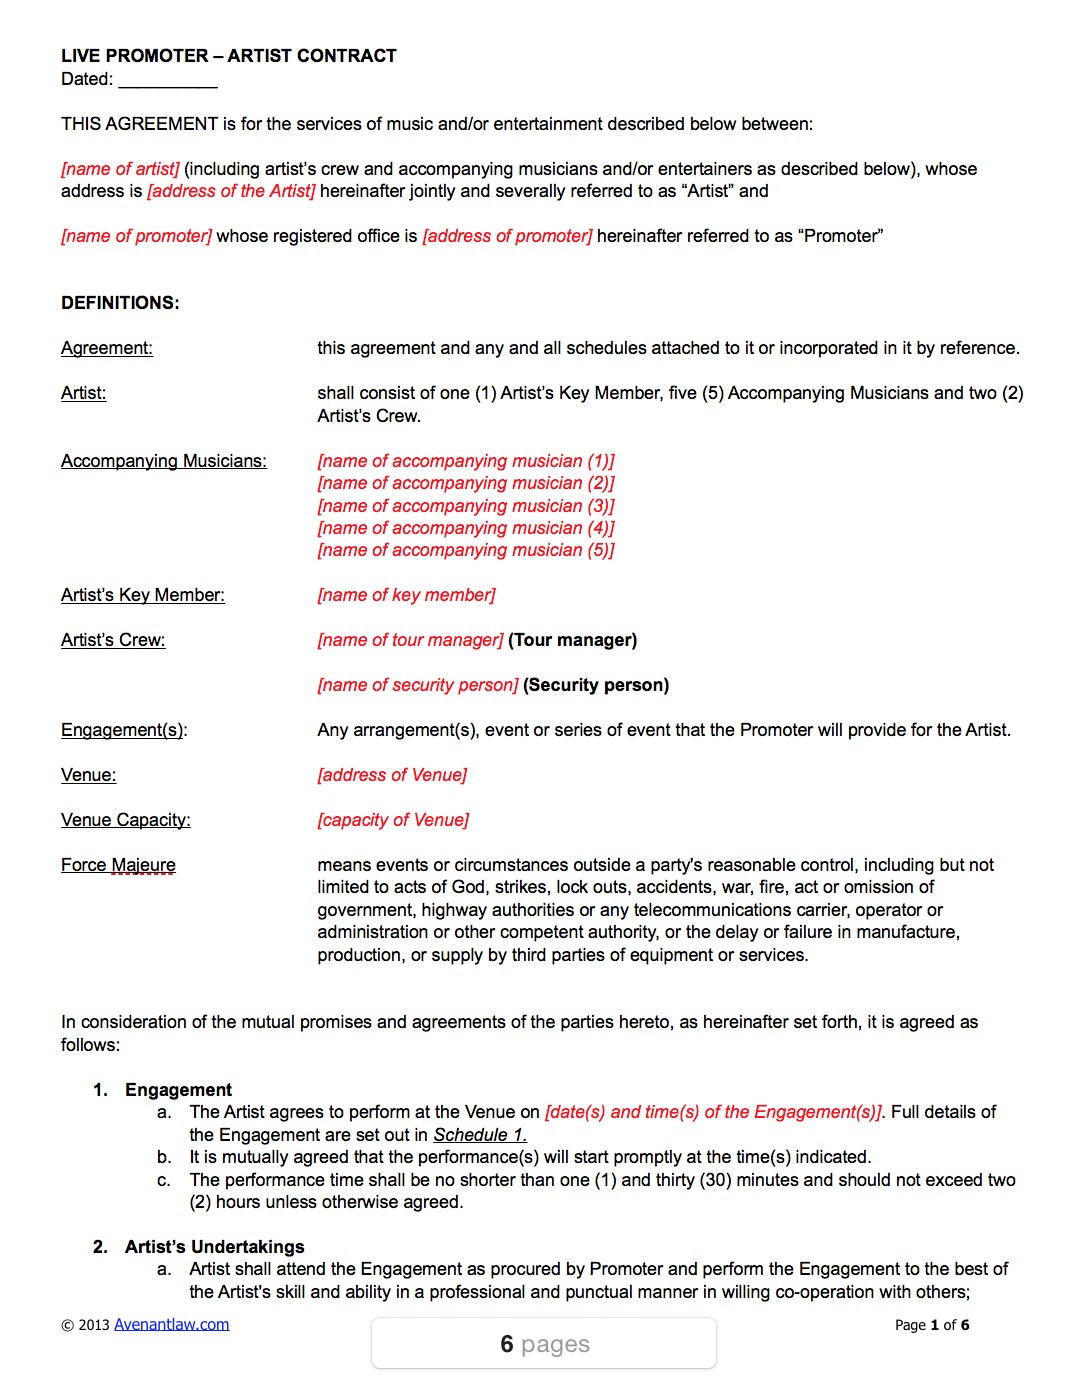 Live Promoter Artist Contract Template Document Agreement